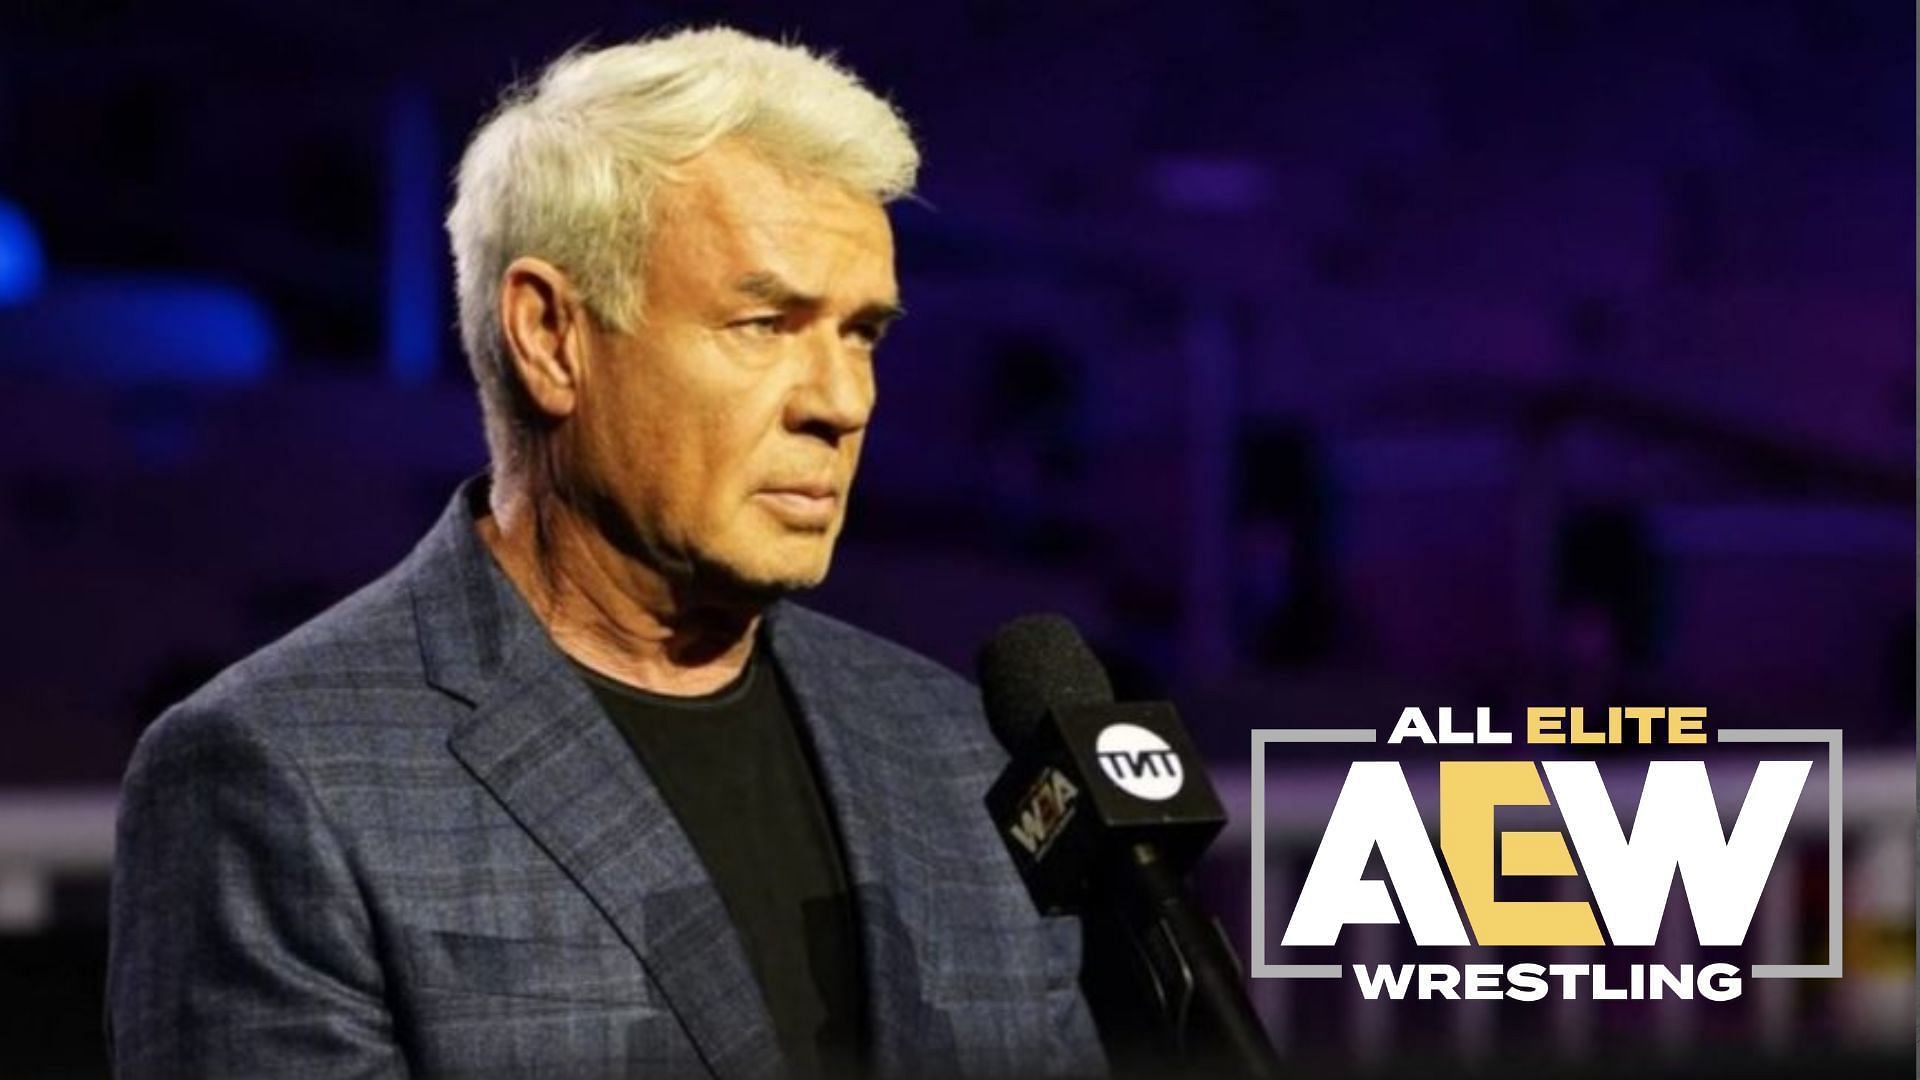 Eric Bischoff talks about backstage administration in AEW